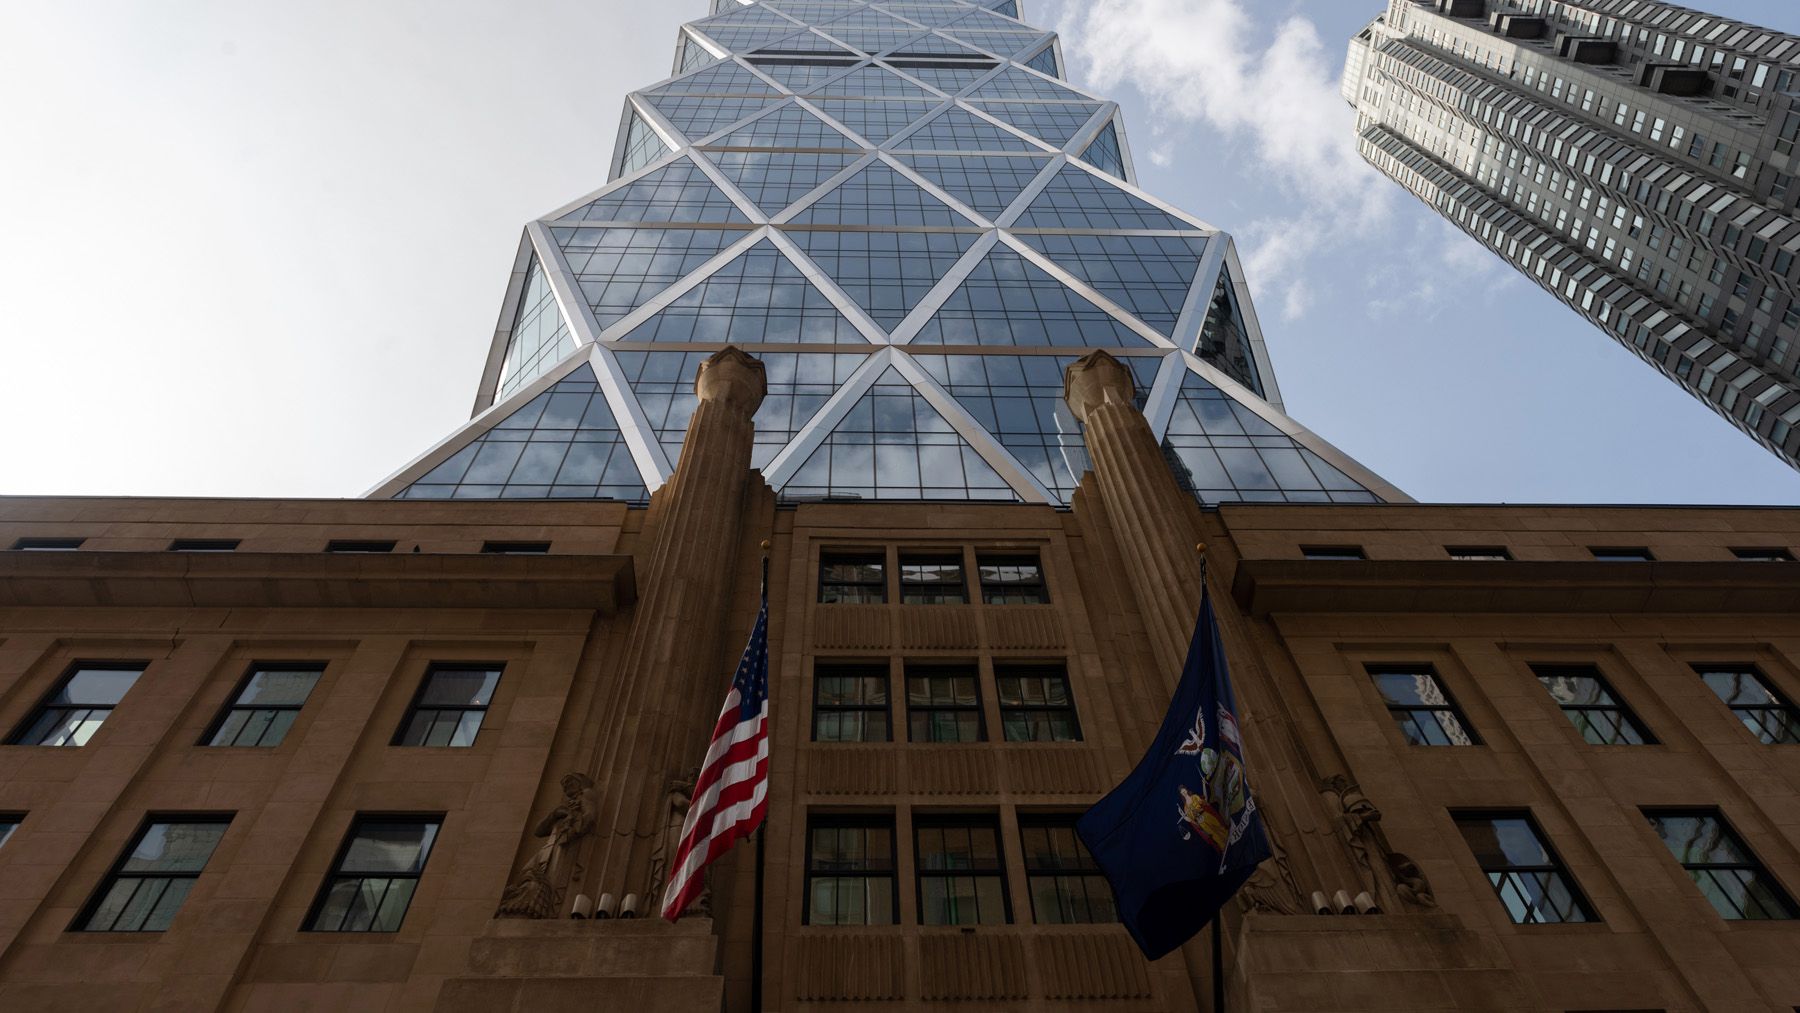 Hearst Magazines Lays Off at Least 40 Employees